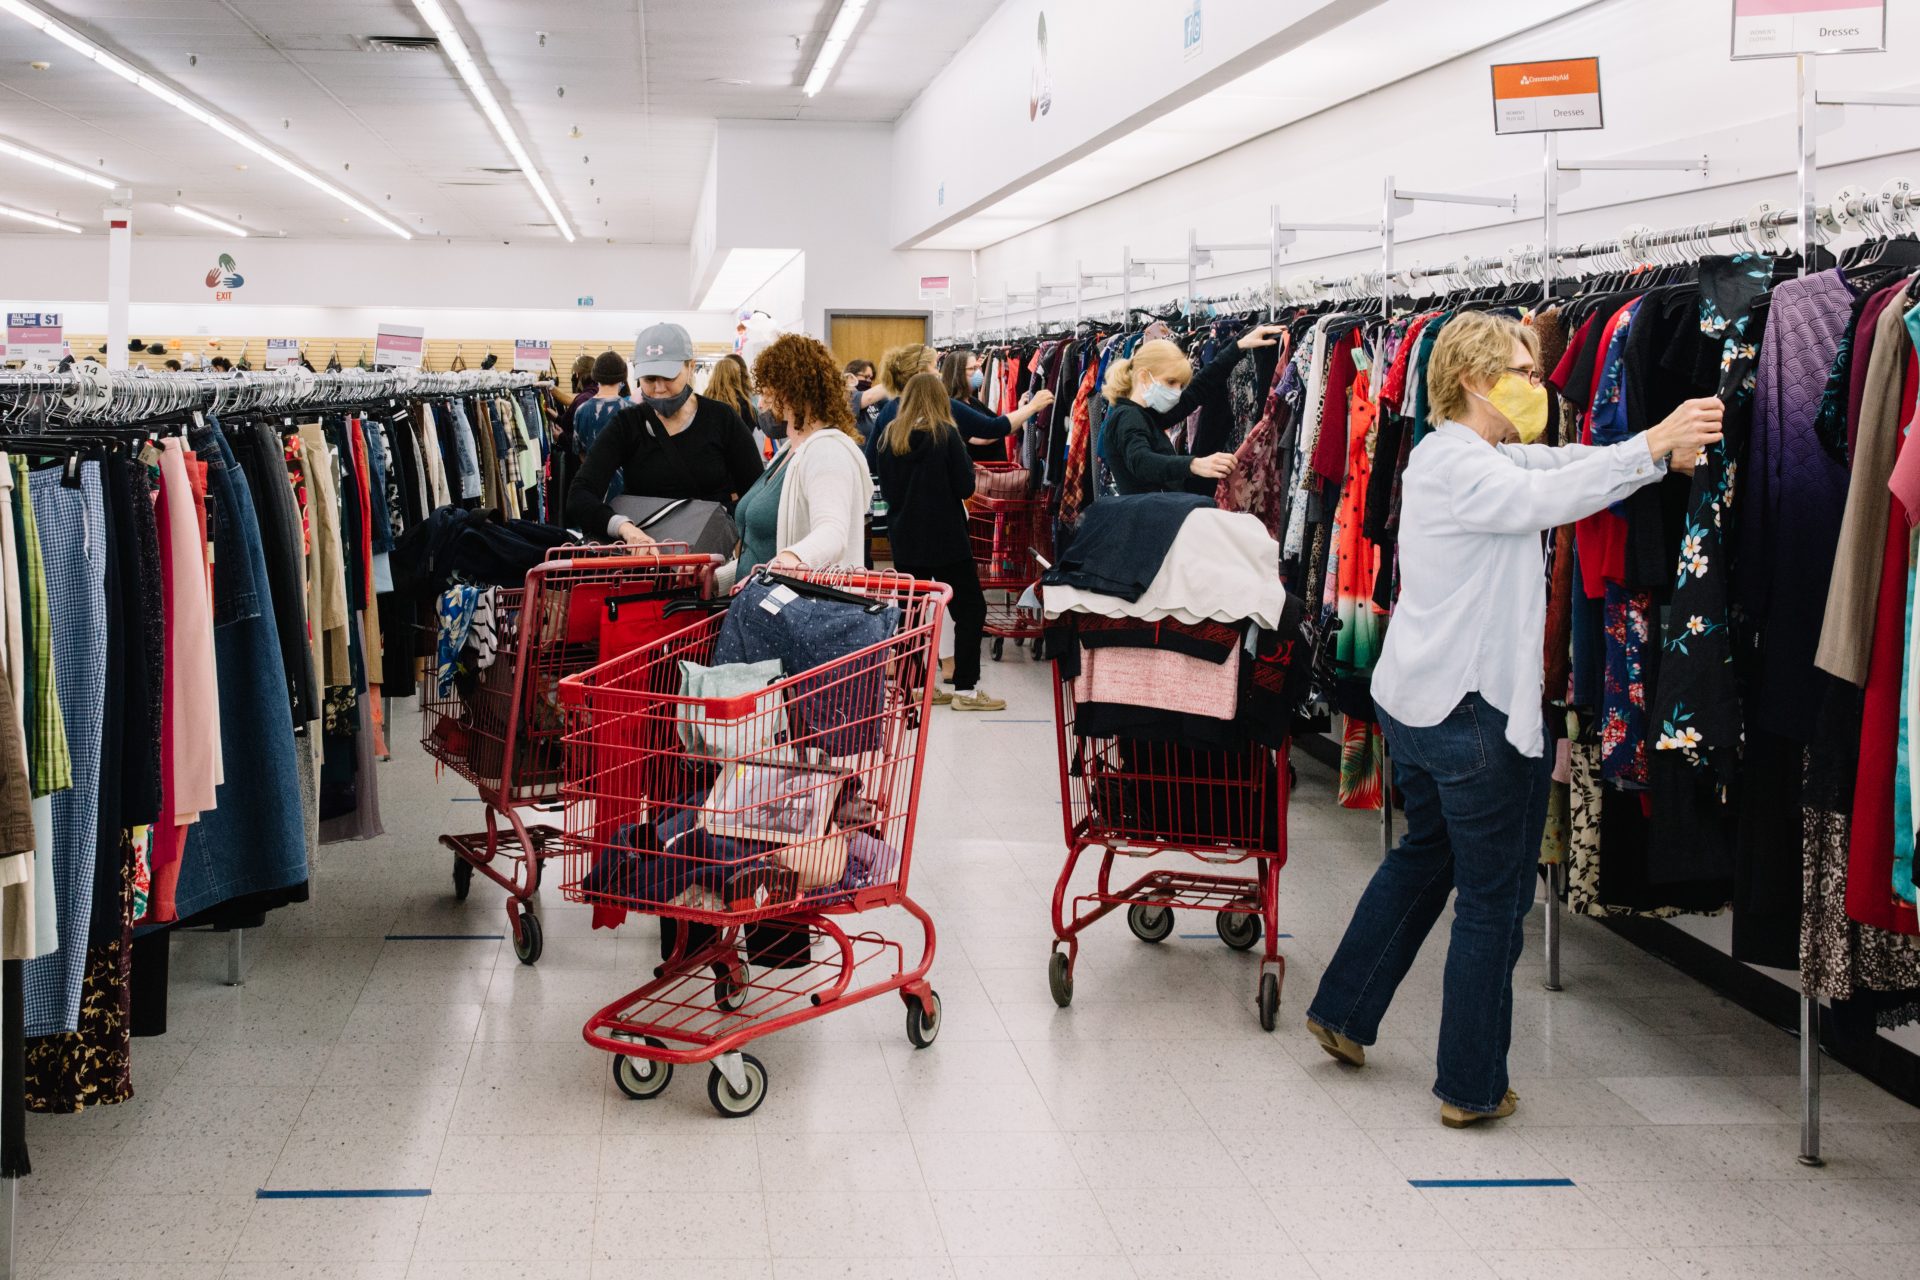 Shoppers line the aisles at Community Aid thrift store in Mechanicsburg on Friday, May 22, the day Cumberland County entered the yellow phase of reopening.